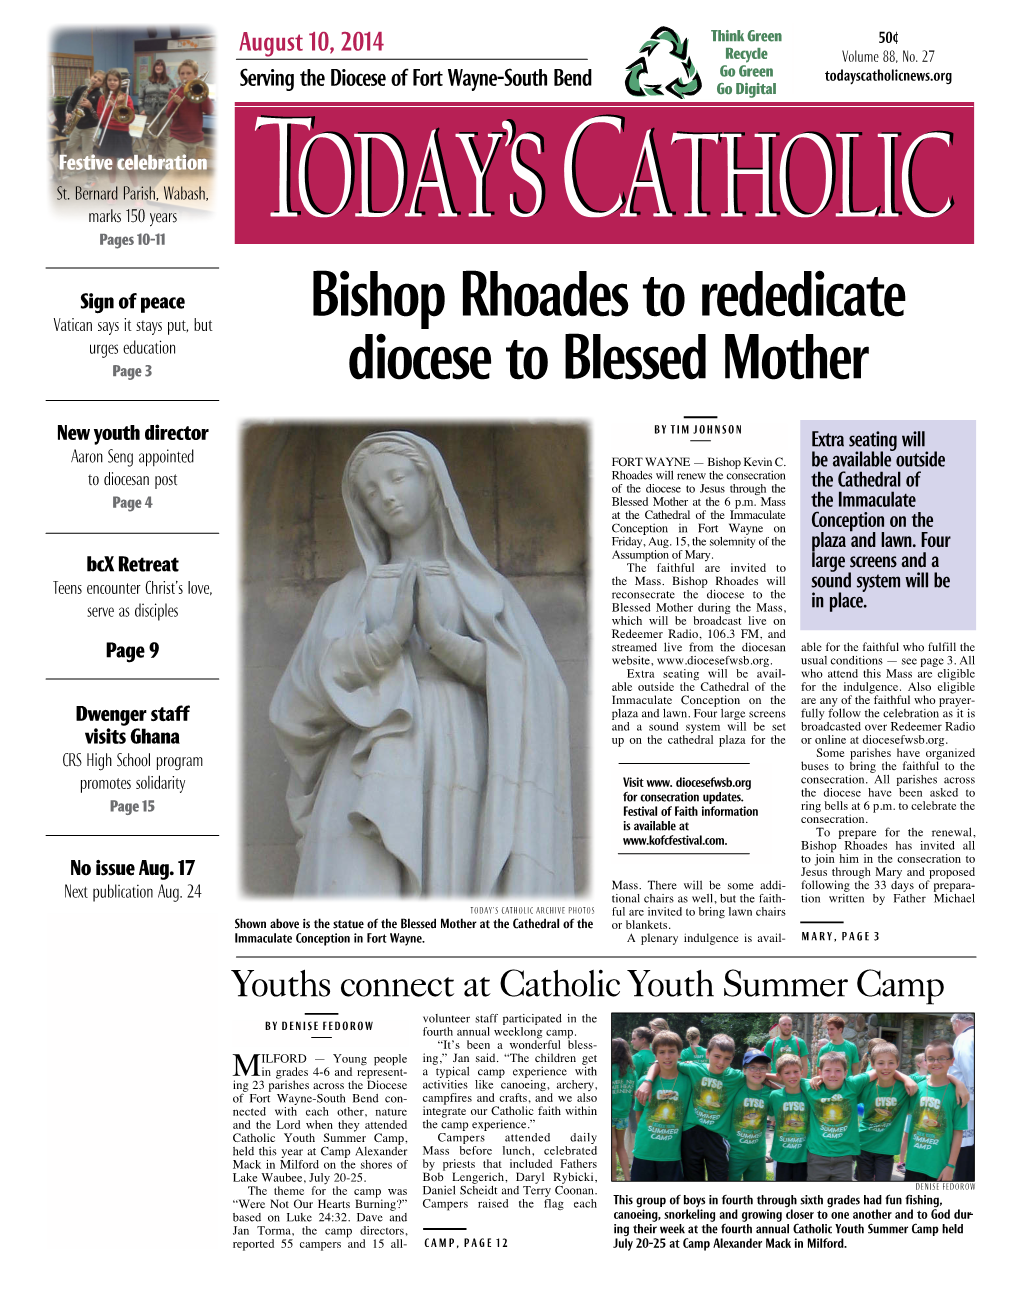 Bishop Rhoades to Rededicate Diocese to Blessed Mother